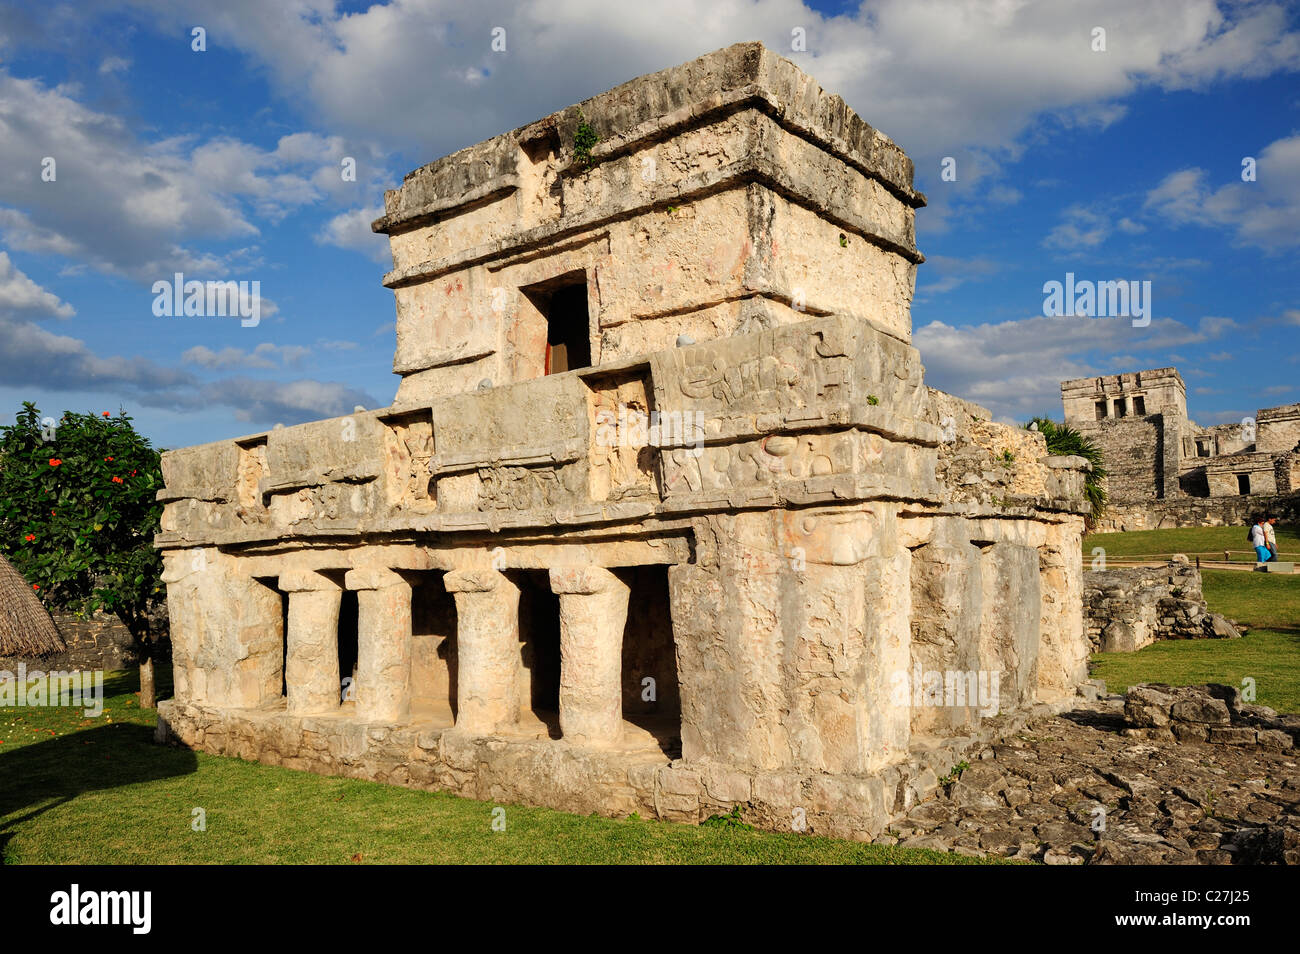 Temple of the Frescoes at Tulum, Quintana Roo, Mexico Stock Photo - Alamy